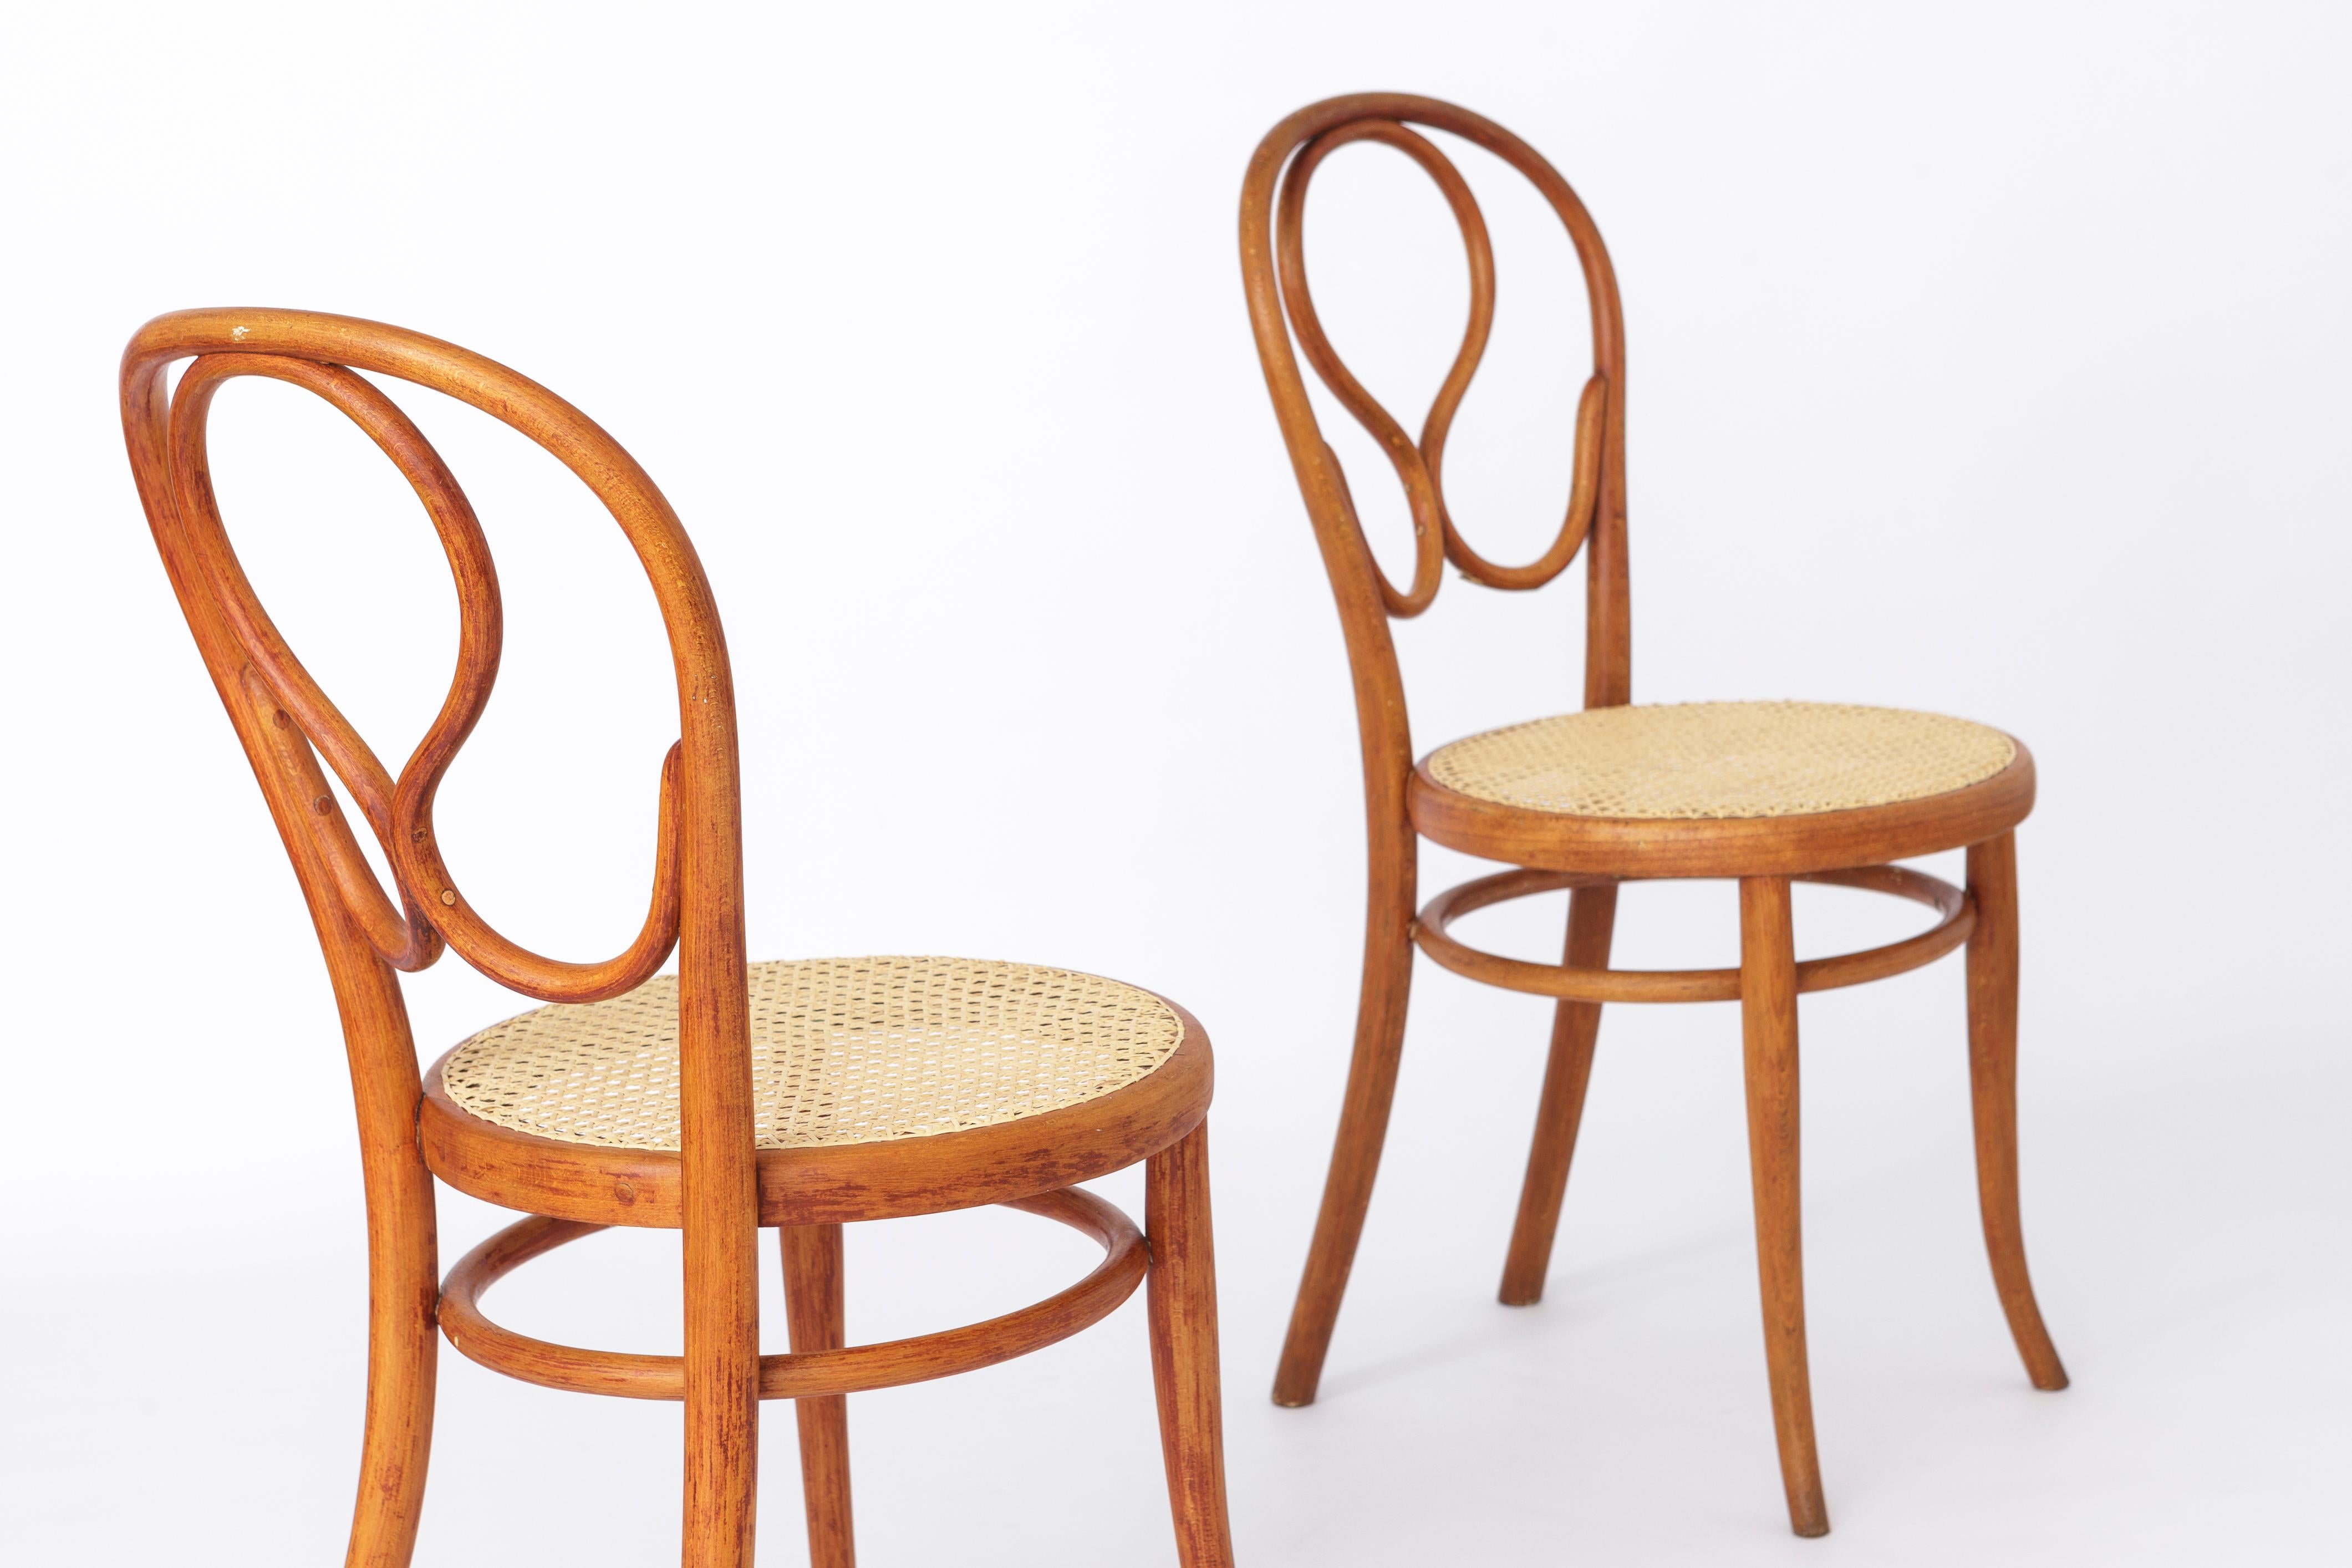 Mid-Century Modern Pair Thonet Cafe-Chairs approx. 1880s - Bentwood, Cane seat weaving